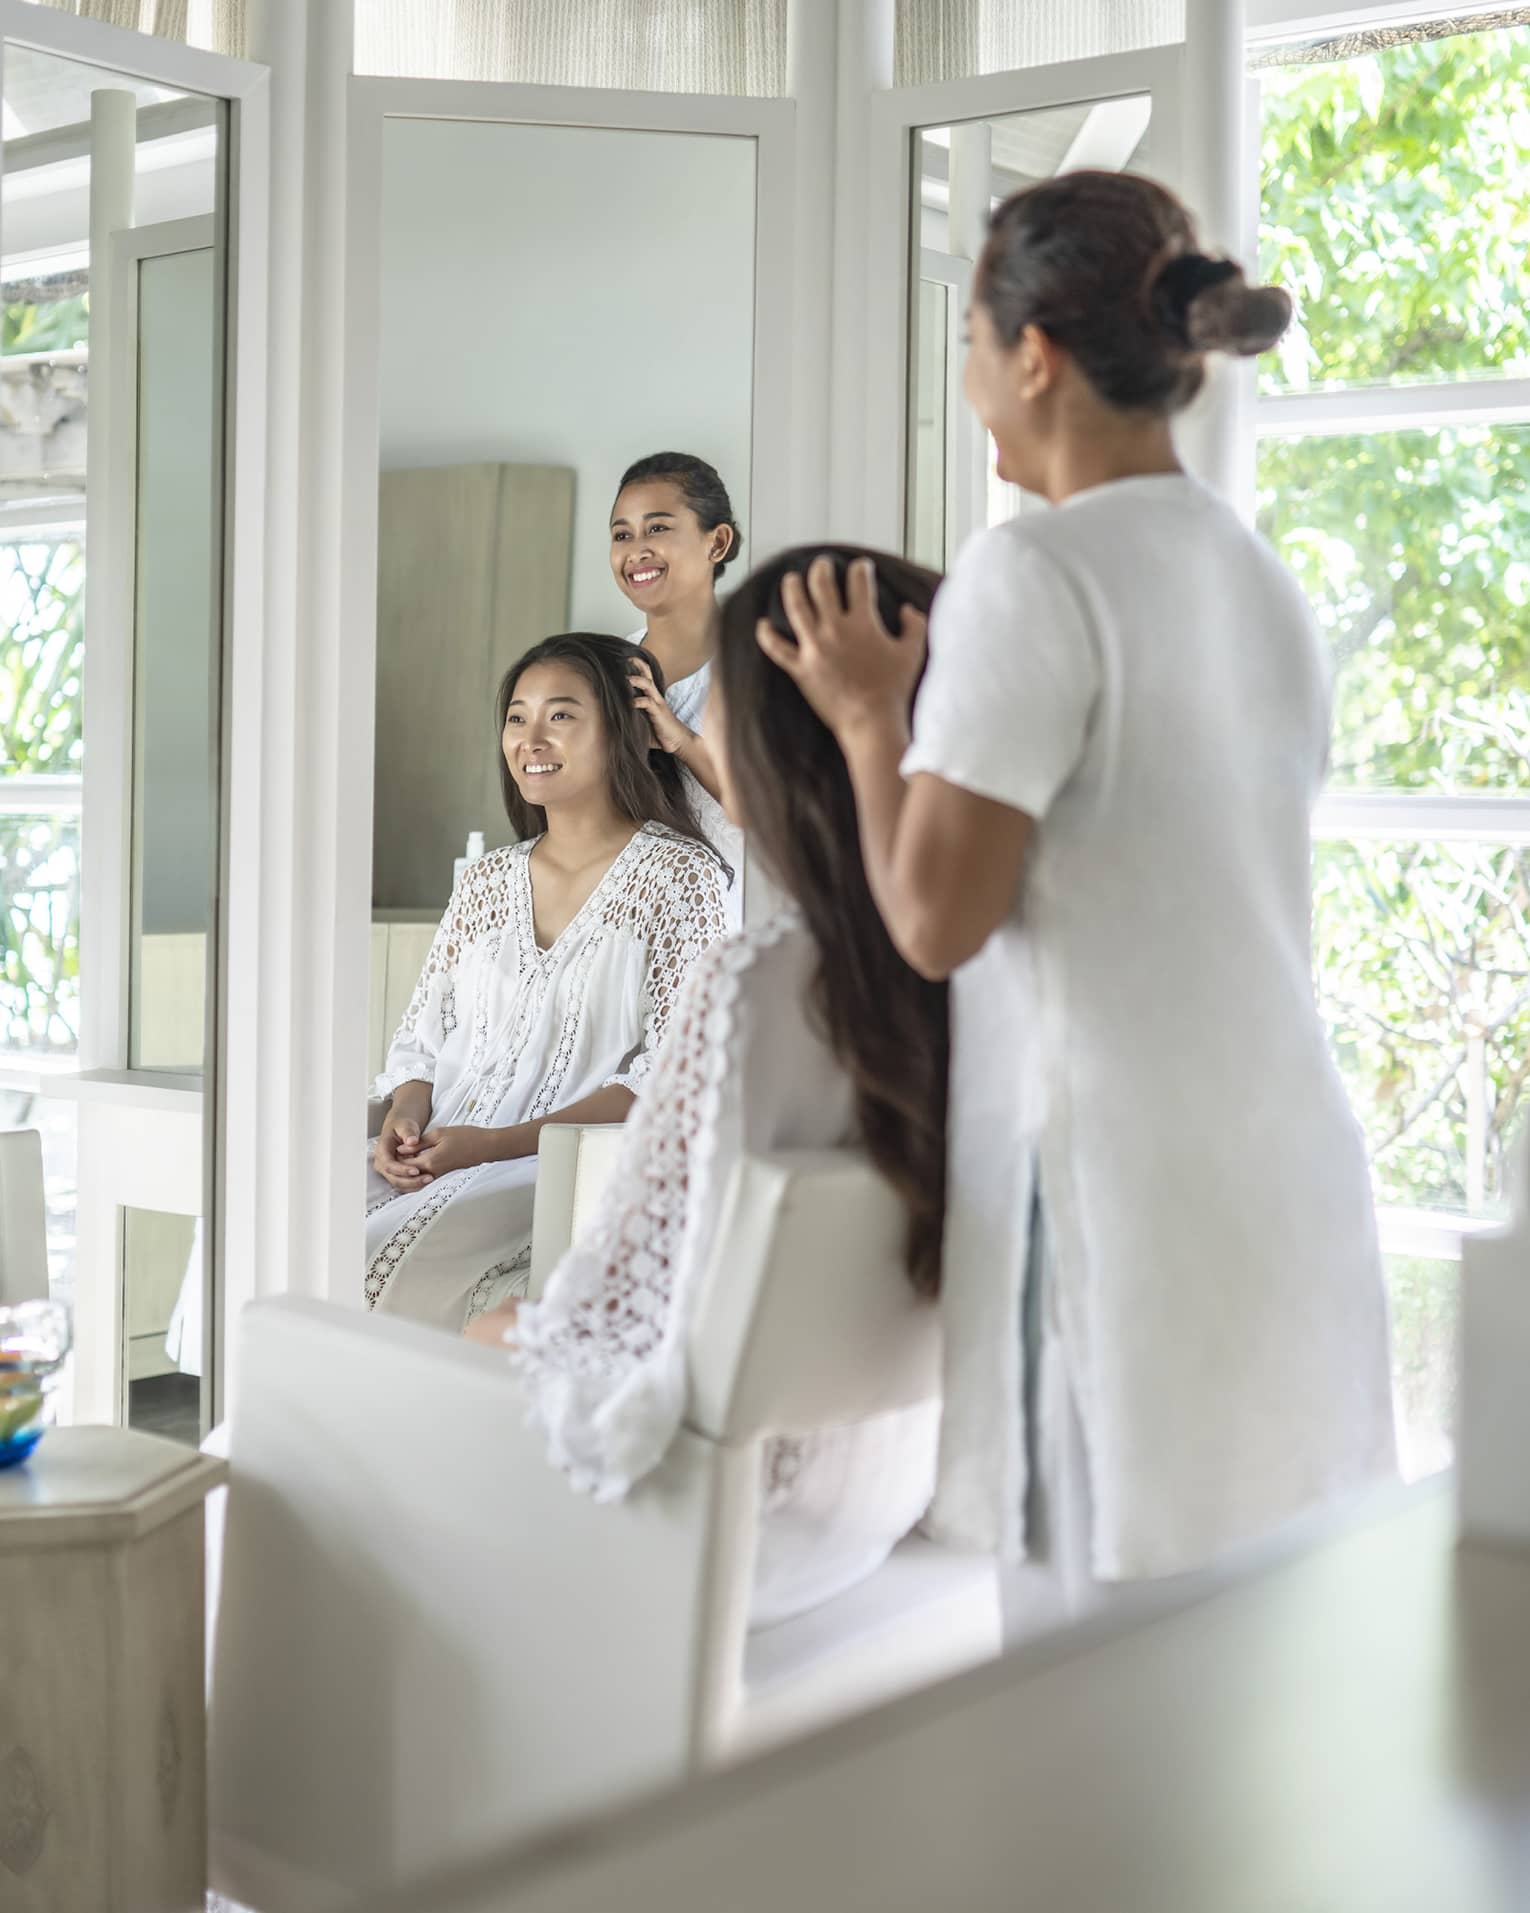 A four seasons guest gets her hair done while sitting in a white salon chair facing floor to ceiling windows revealing greenery just outside the salon